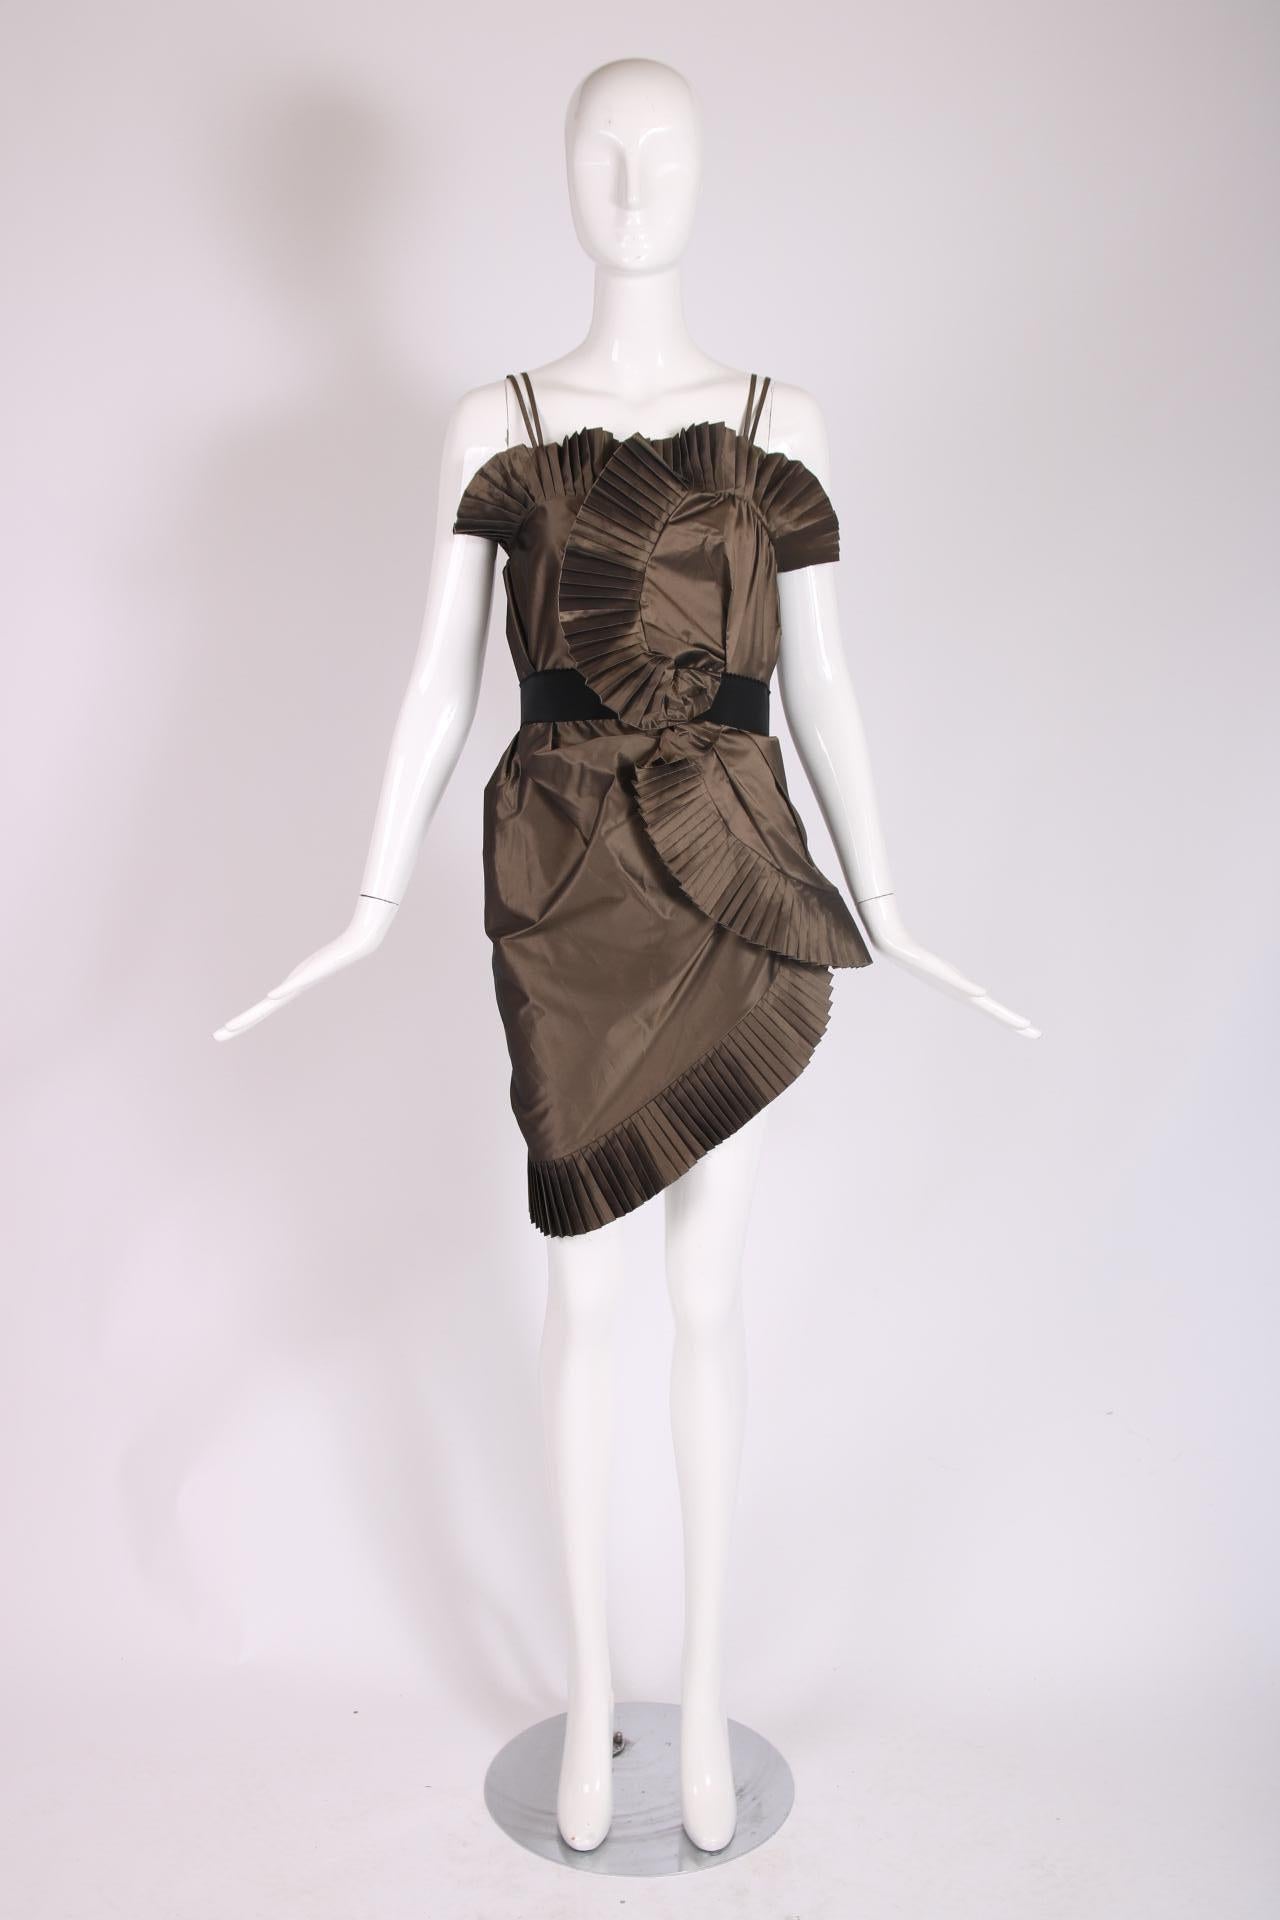 Mid-2000's Christian Dior by John Galliano brown iridescent silk/poly blend mini dress with accordion pleating design motif. There is a built-in 2